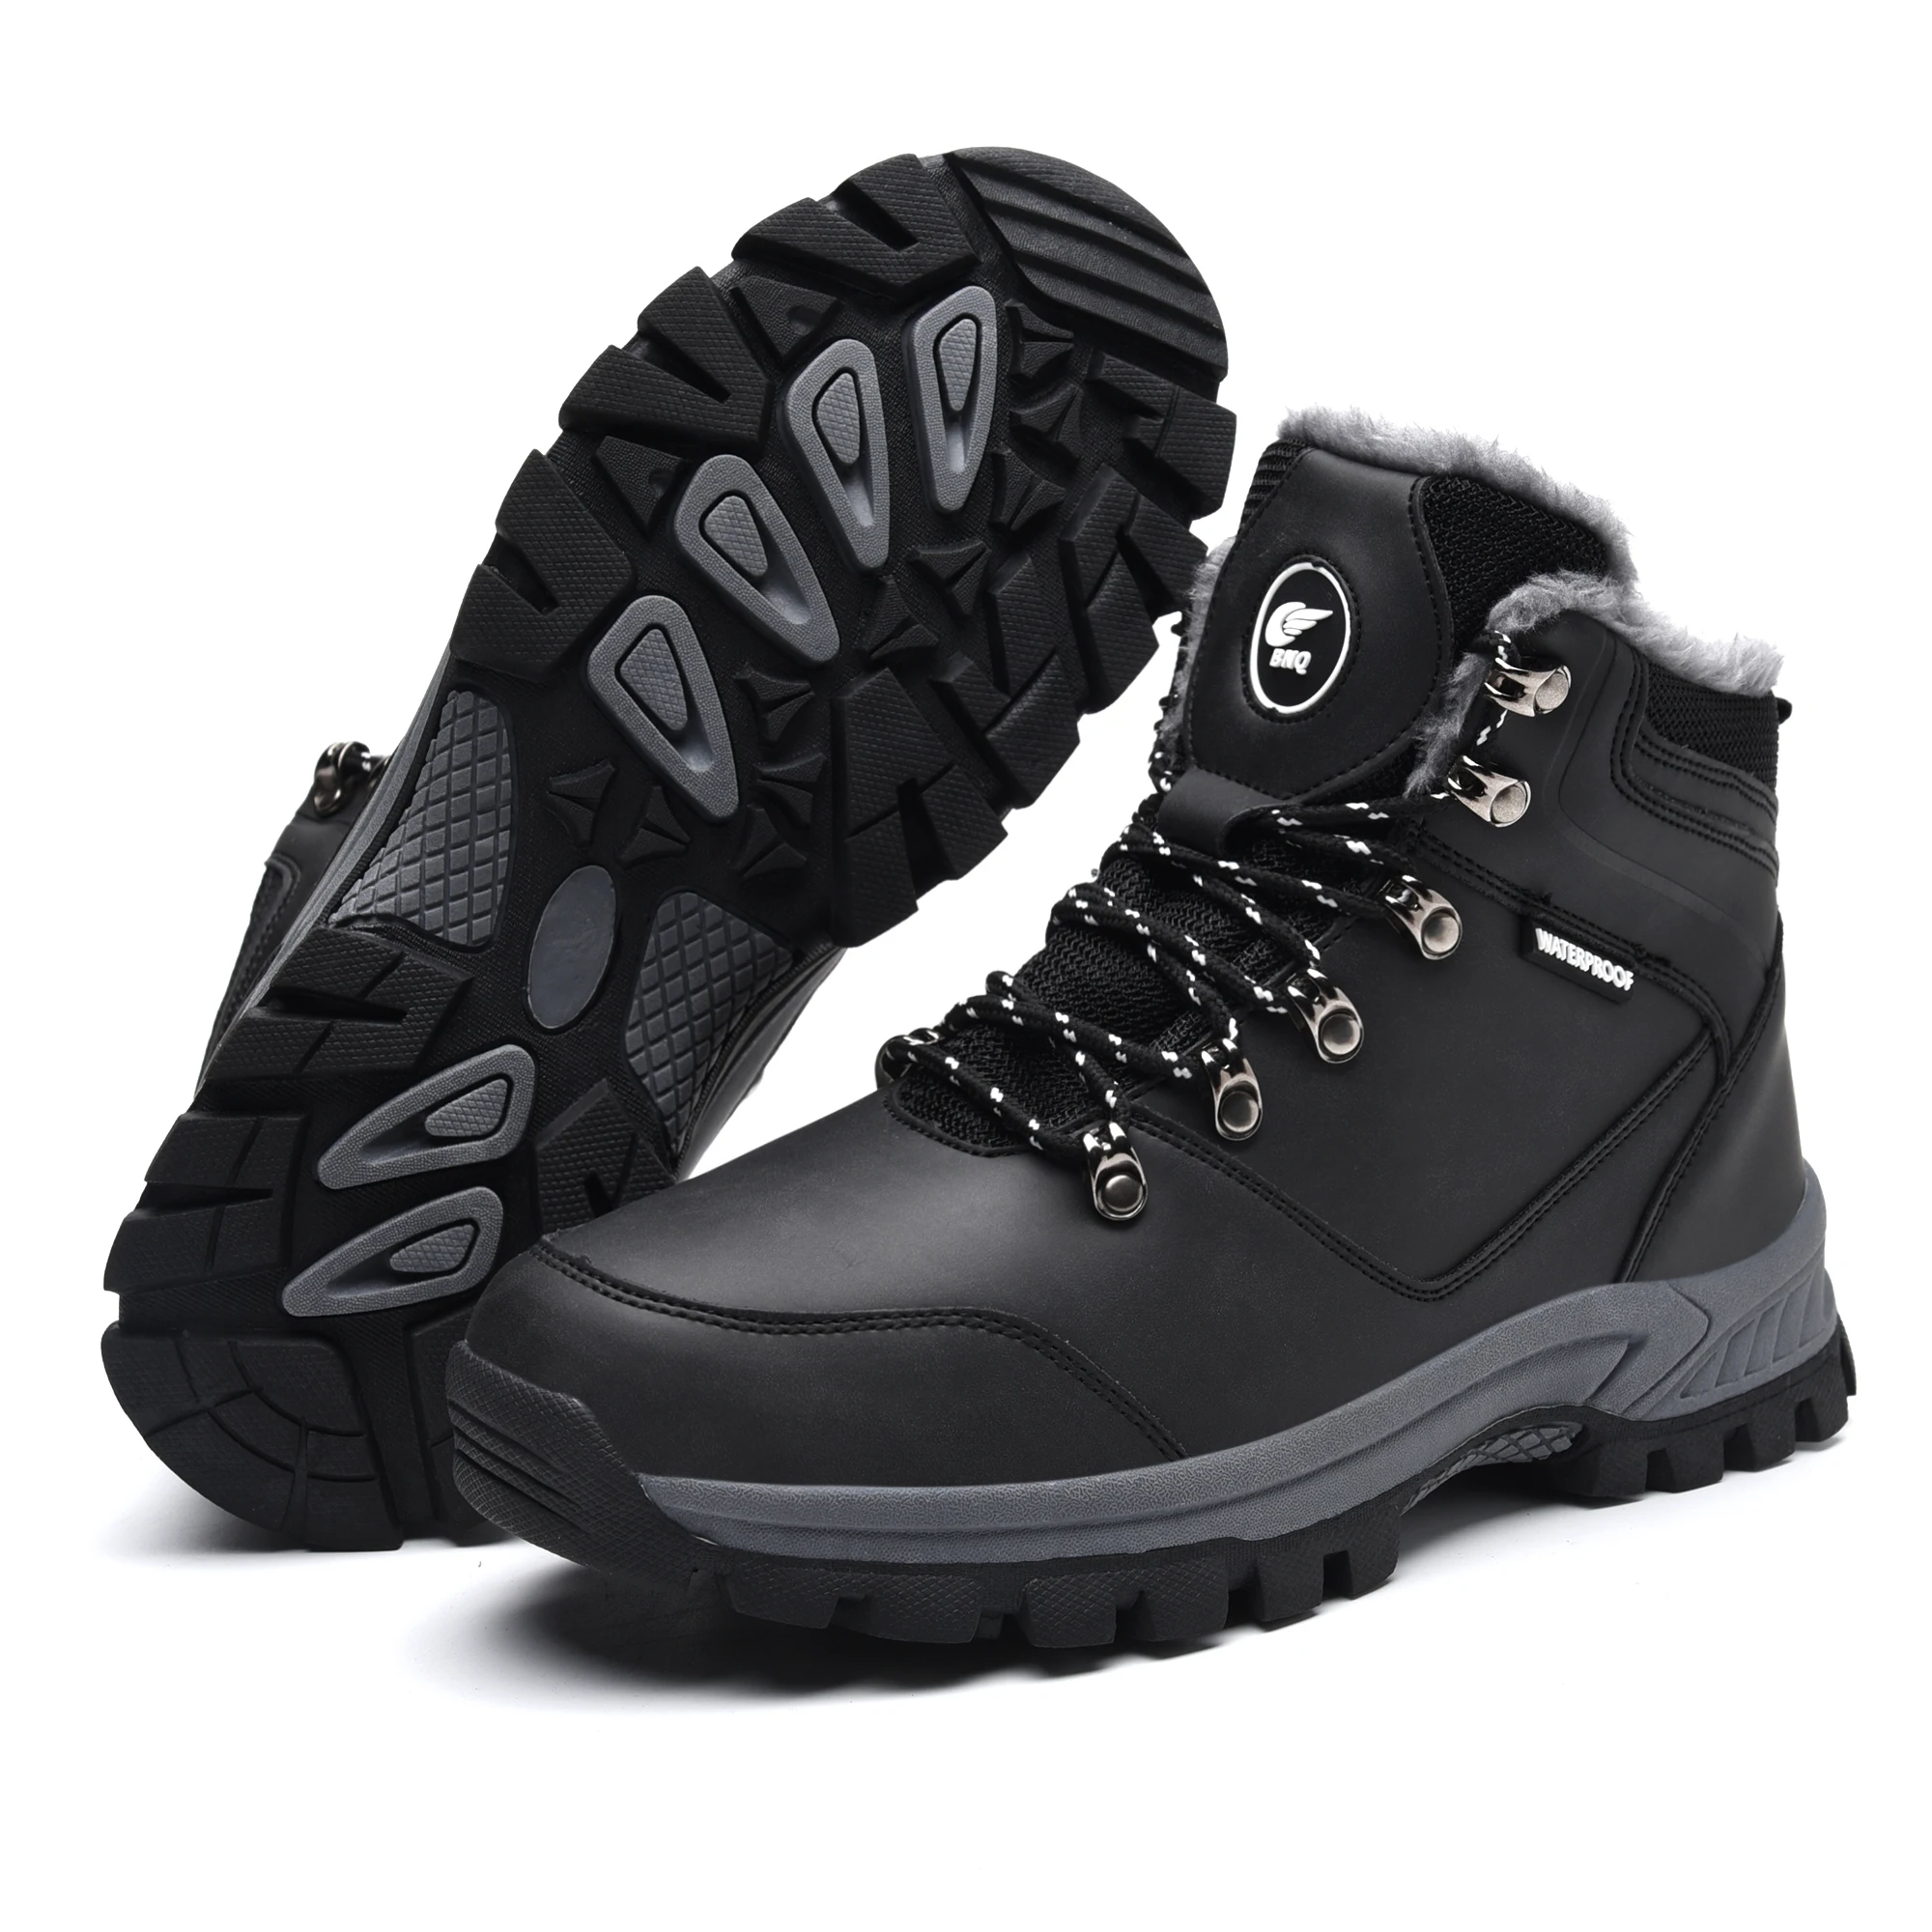 

Wholesale high-quality wear-resistant, warm, waterproof and anti-skid mountaineering boots outdoor walking snow boots